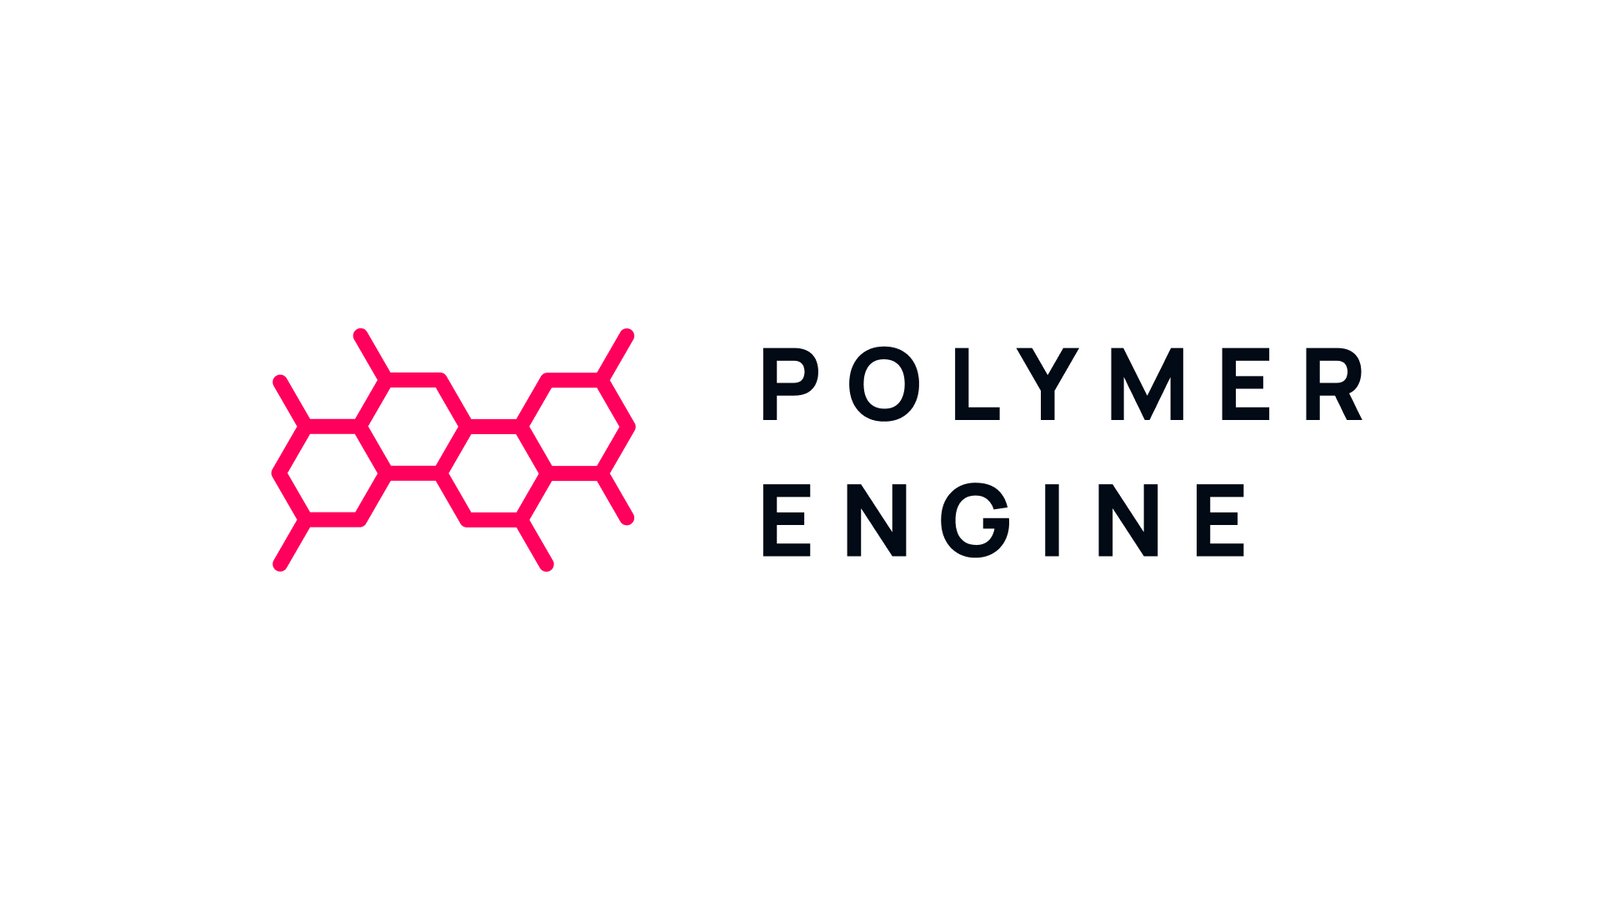 The 'Polymer Engine' logo. It has a magenta hexagonal icon much like a polymer structure.